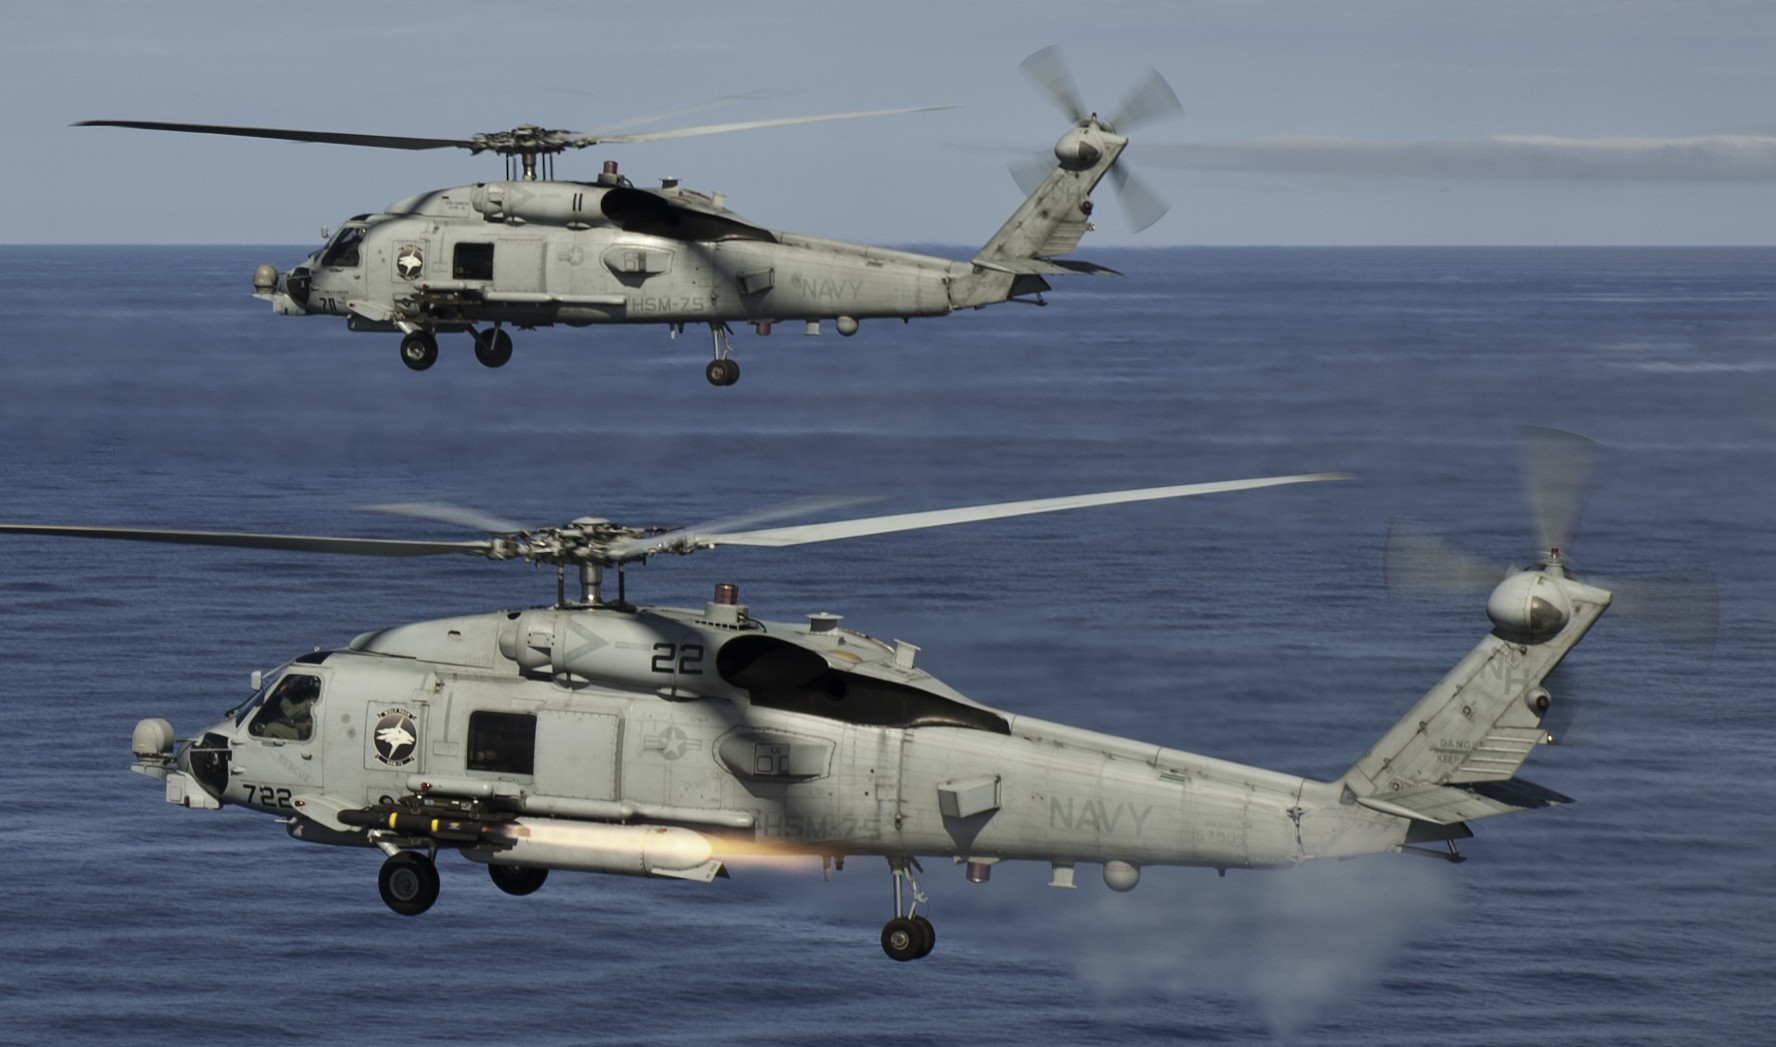 hsm-75 wolfpack helicopter maritime strike squadron us navy mh-60r seahawk 2013 29 agm-114 hellfire missile